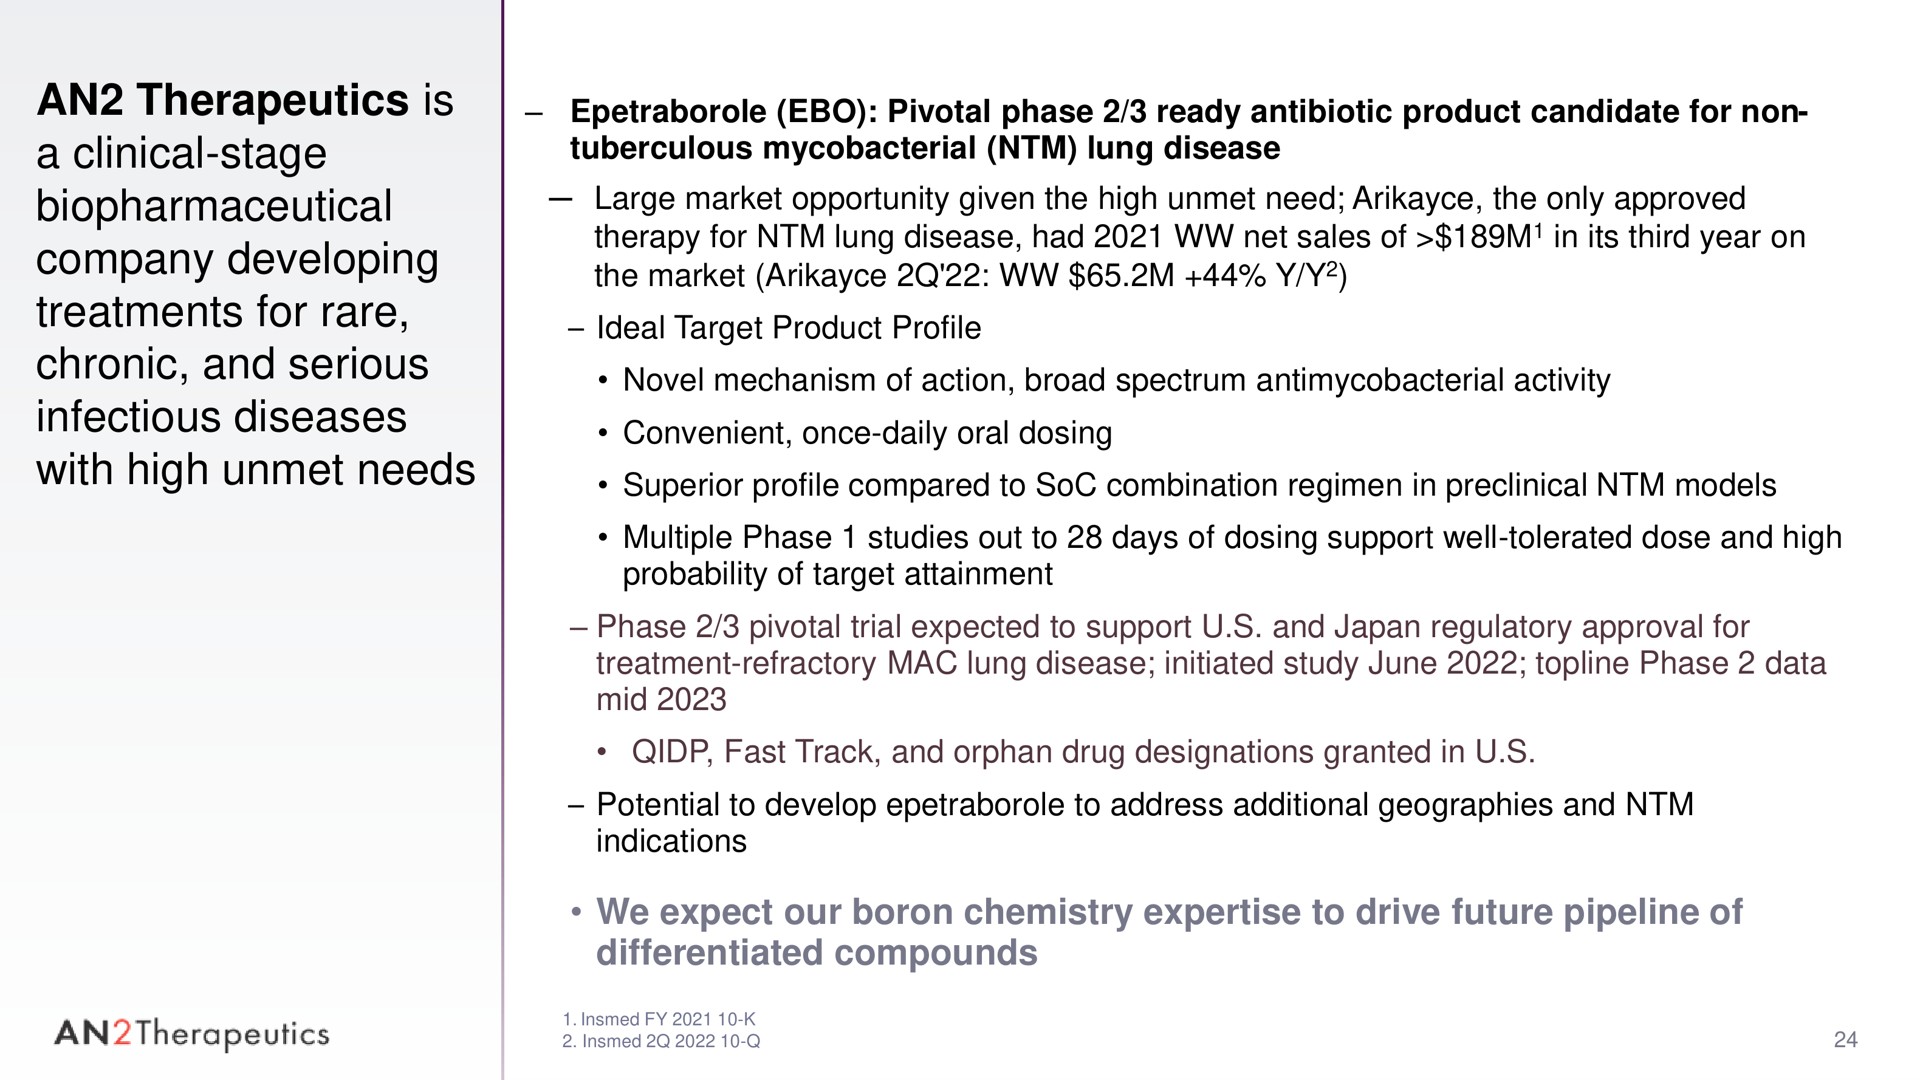 an therapeutics is a clinical stage company developing treatments for rare chronic and serious infectious diseases with high unmet needs we expect our boron chemistry to drive future pipeline of differentiated compounds an therapeutics | AN2 Therapeutics